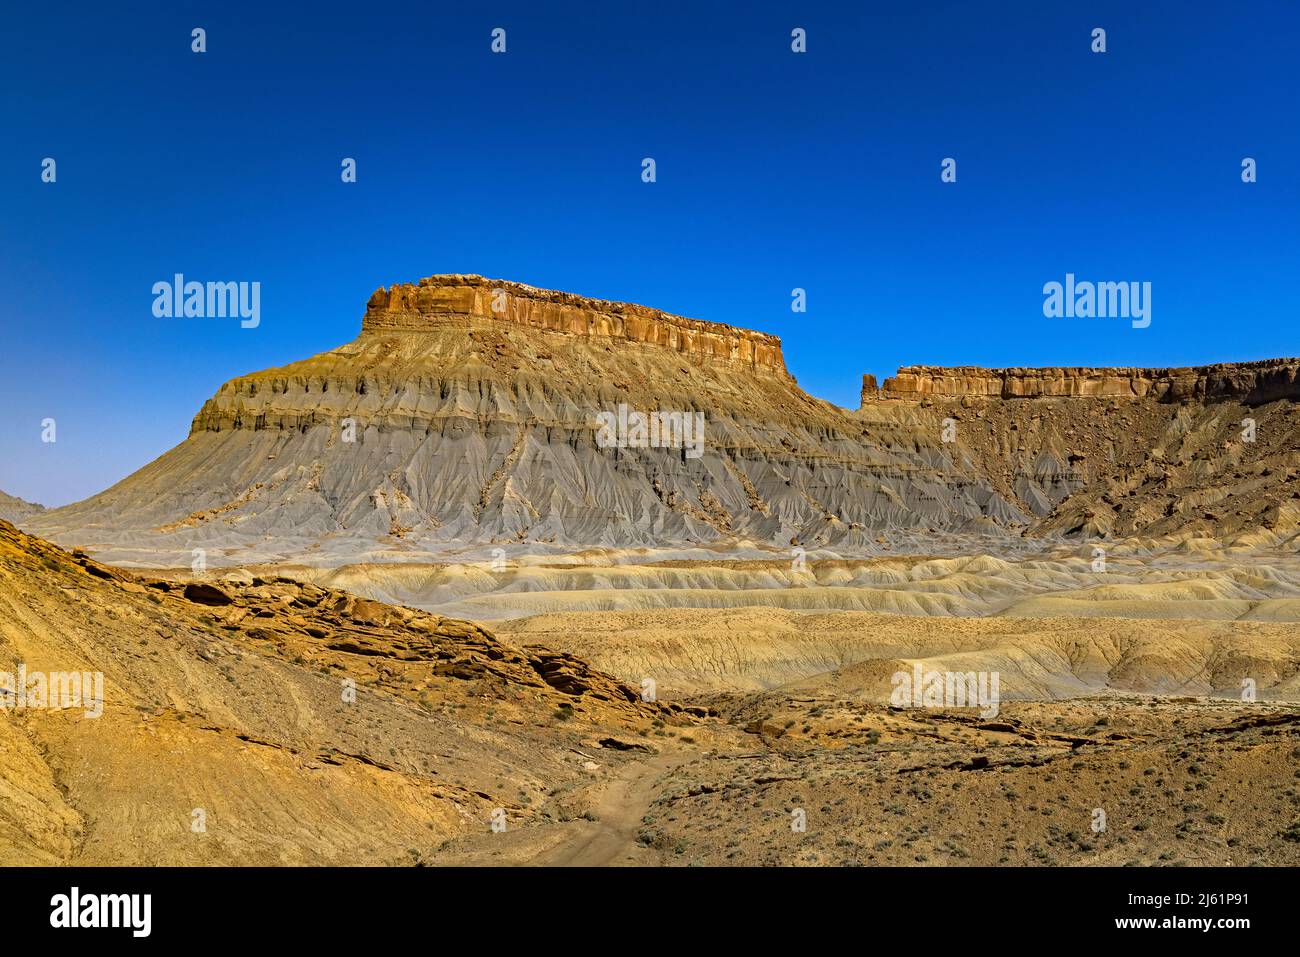 The stunning formation known as North Caineville Mesa. This view looks southeast from West Factory Road in the BLM land north of Caineville, UT, USA. Stock Photo